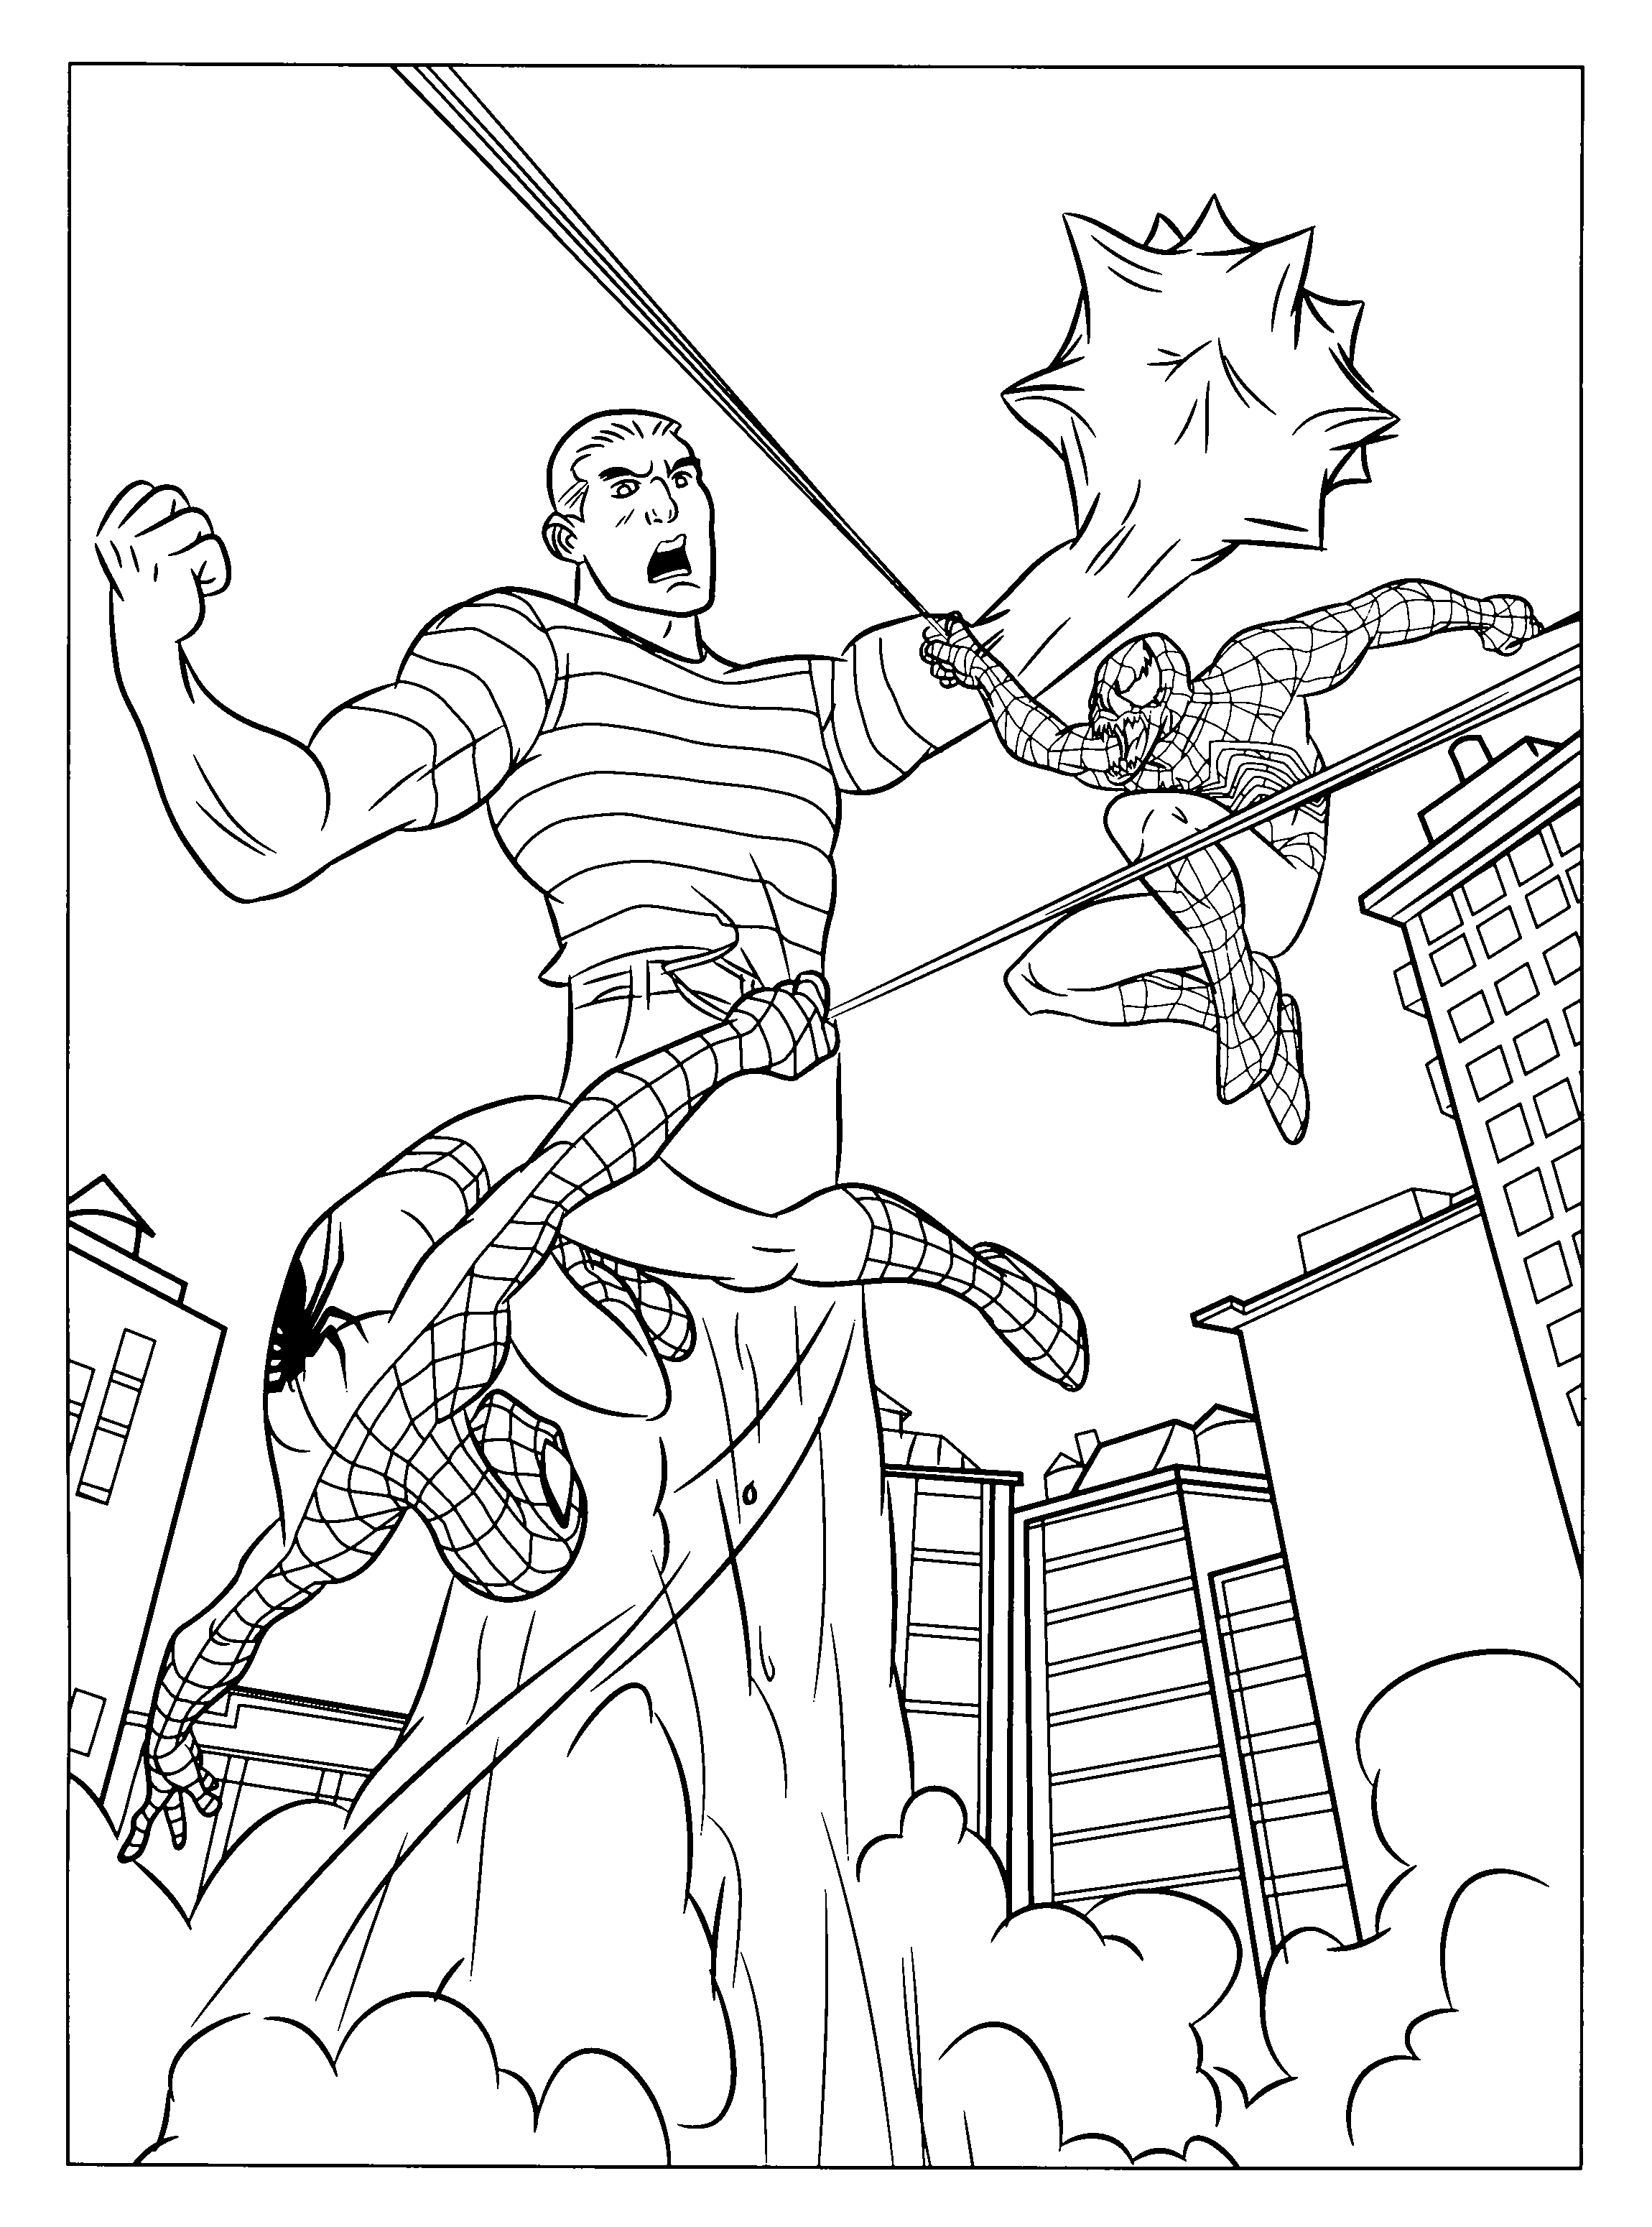 animated-coloring-pages-spider-man-image-0110